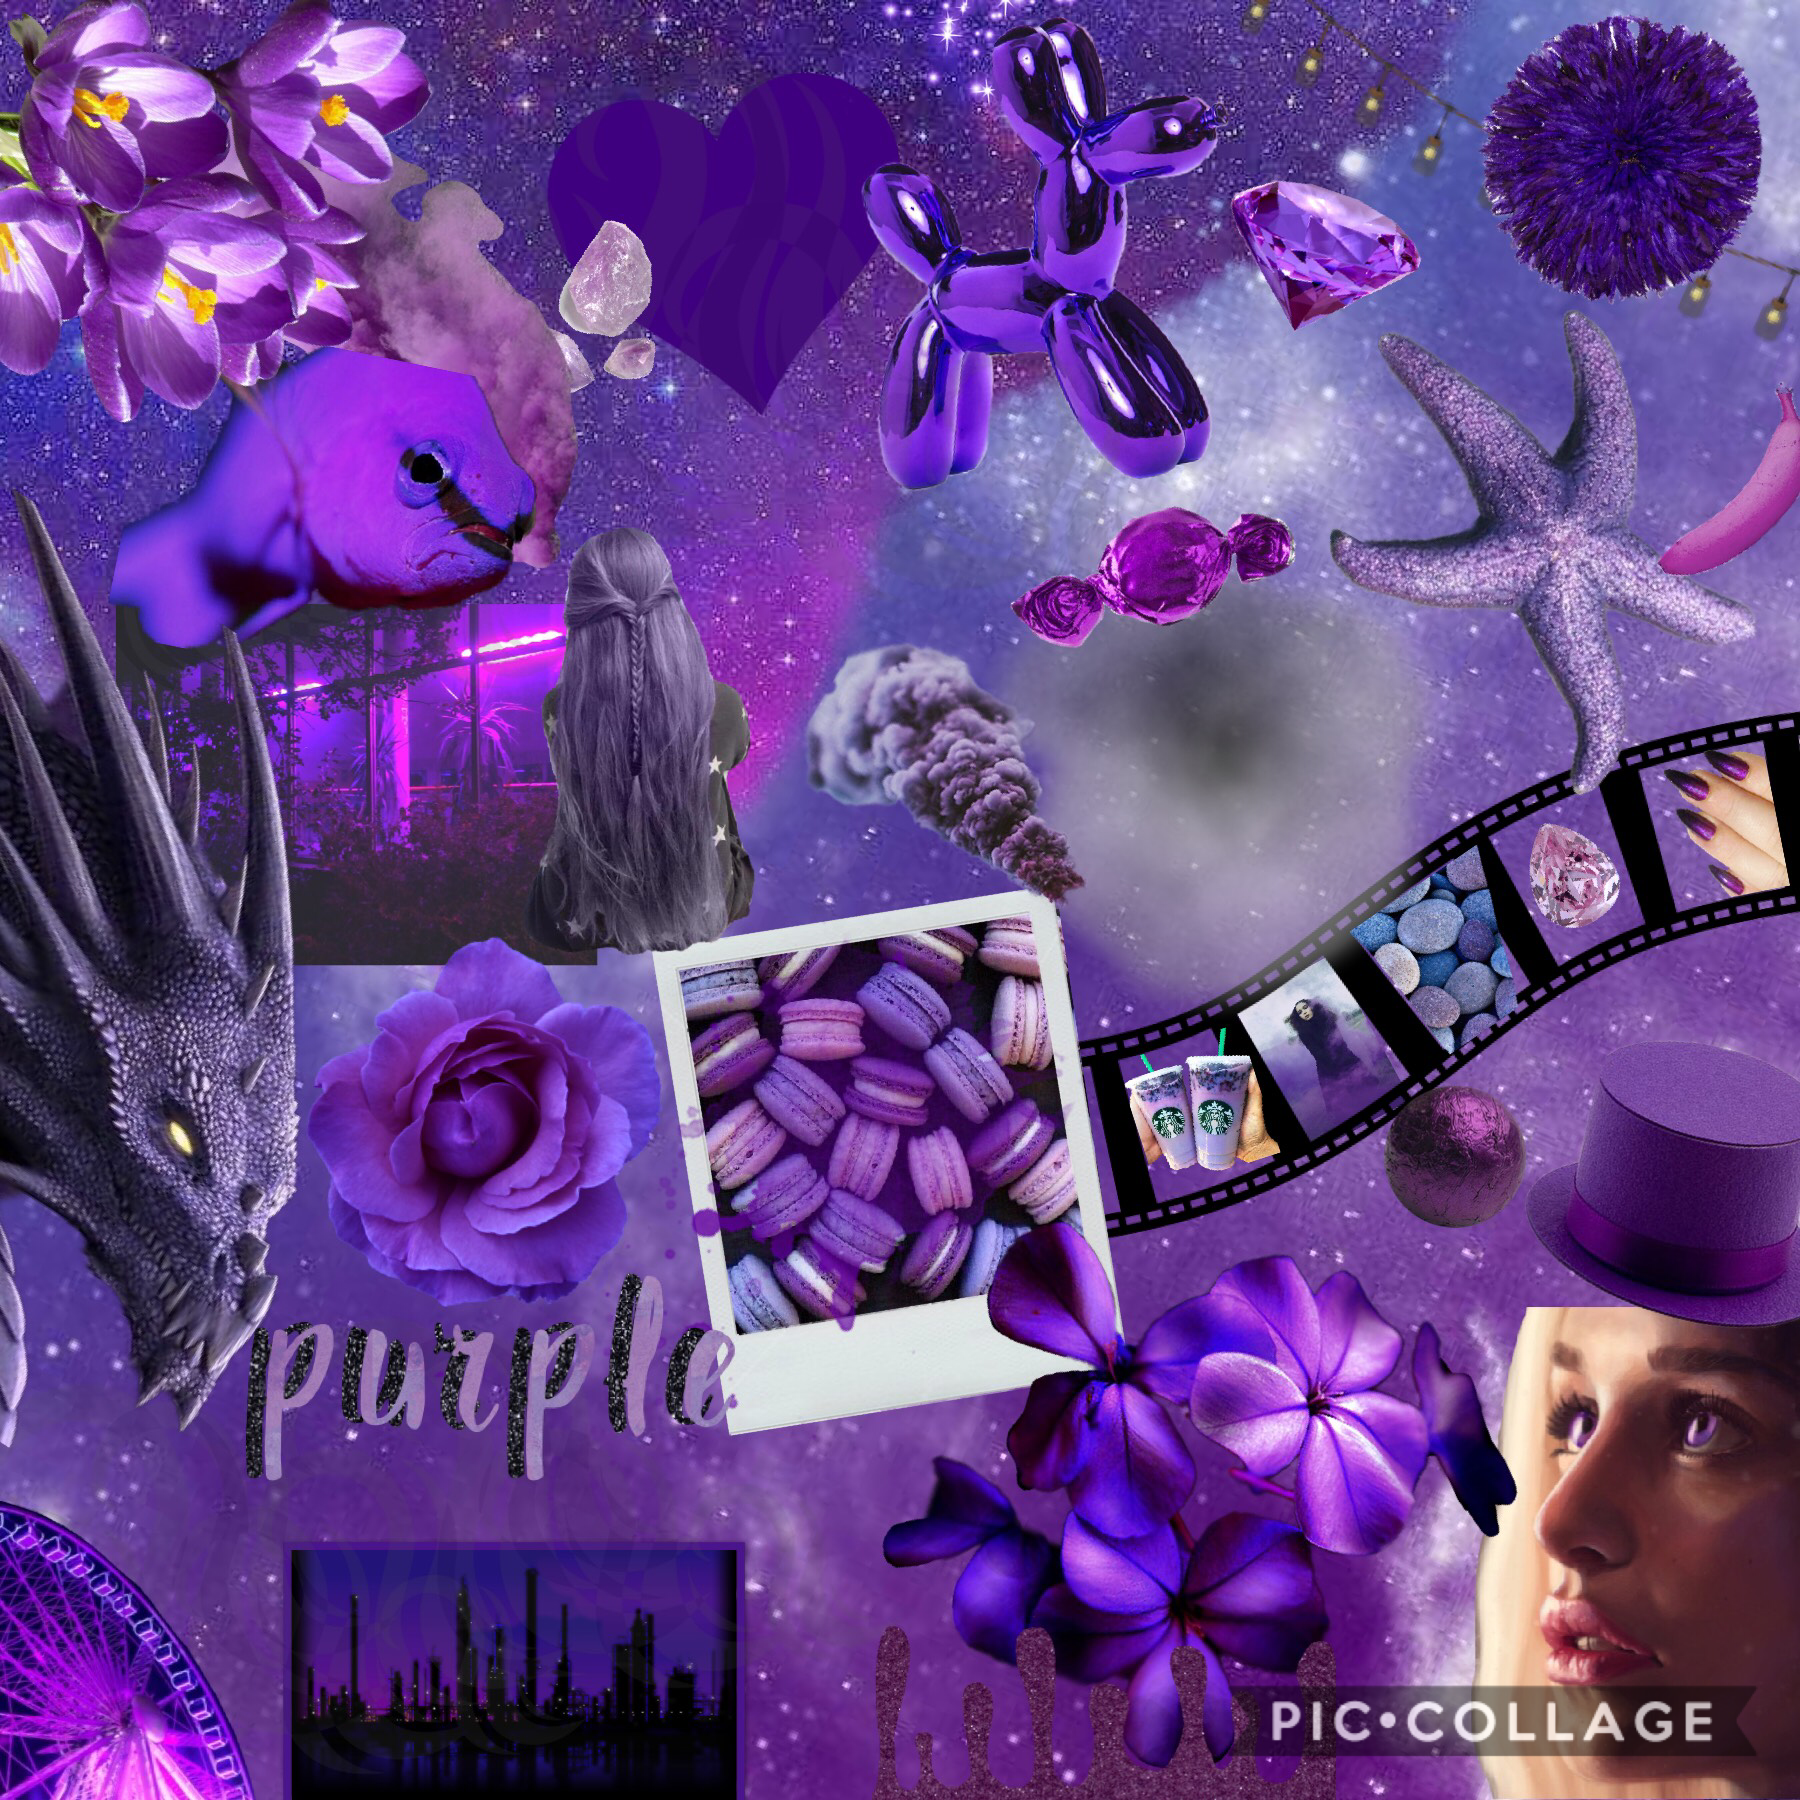 PuRpLe
I saw someone posted a collage that was all purple, so this is inspired by them. I can’t remember who it was though.